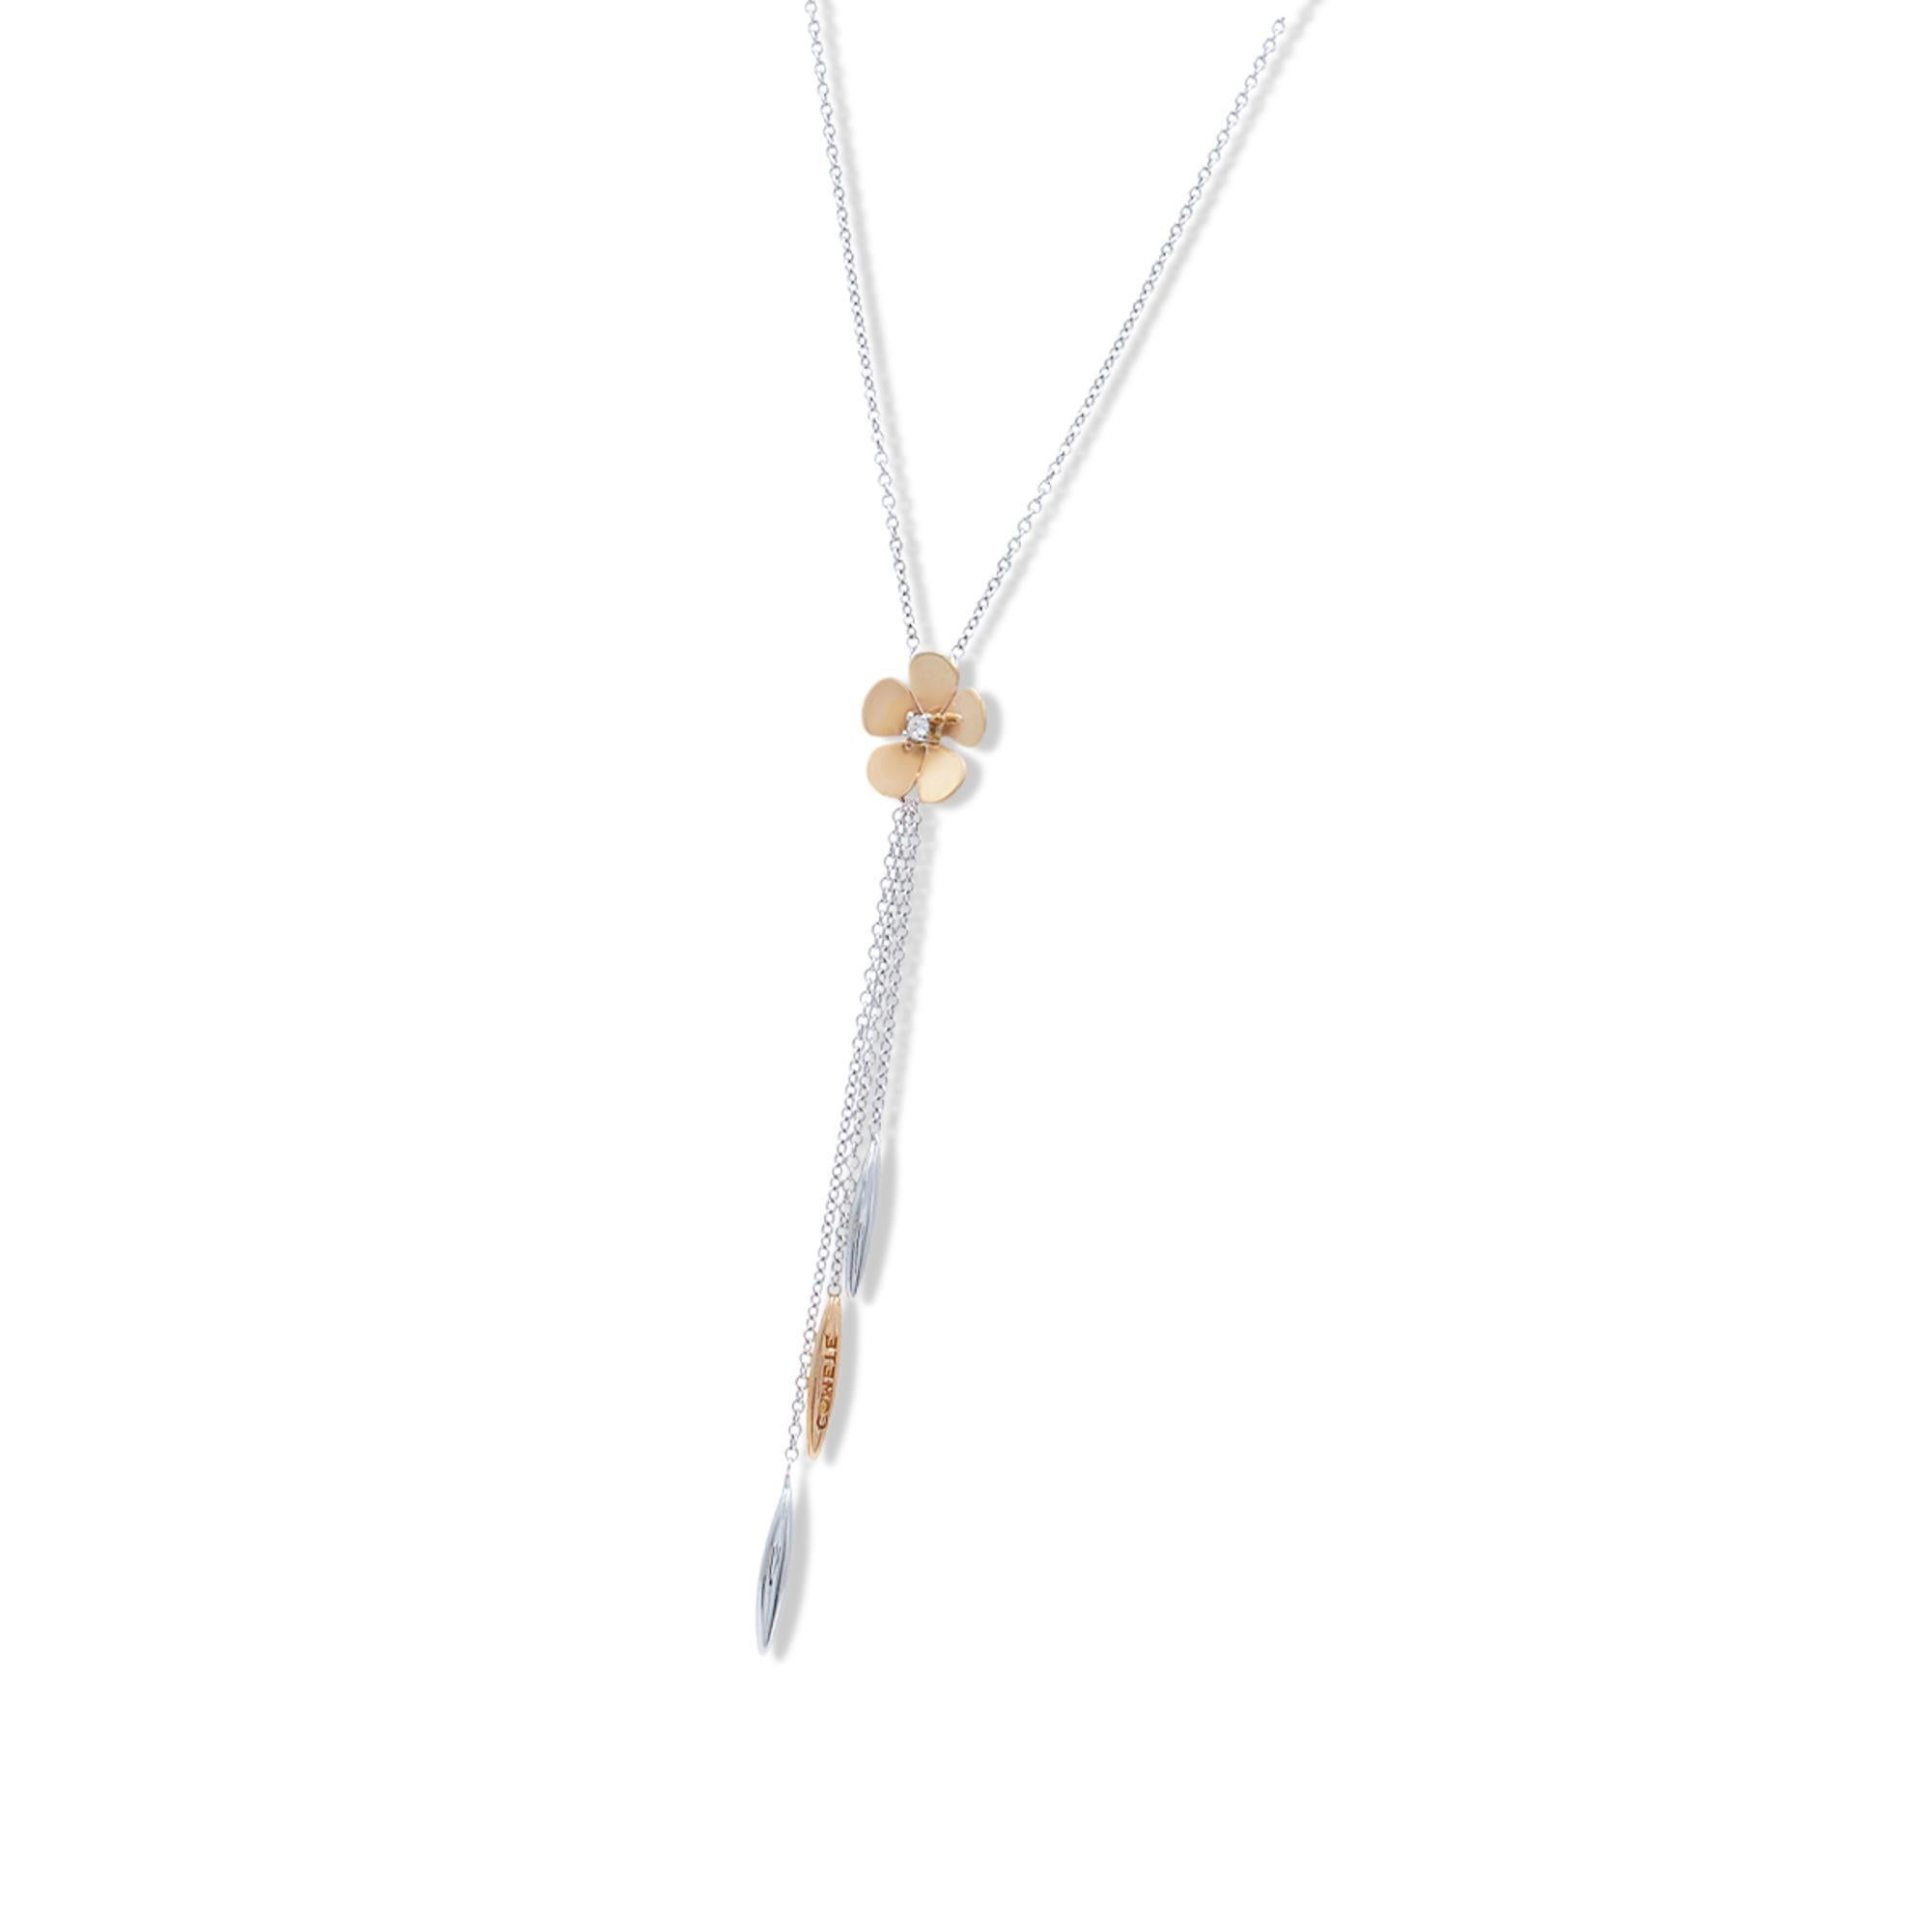 Beautiful Diamond Two-Tone Flower Pendant Necklace crafted in 18K yellow and white gold. Display your love for flowers when wearing this lovely dainty necklace. This necklace features one single diamond in the center of a flower weighing 0.01ct.